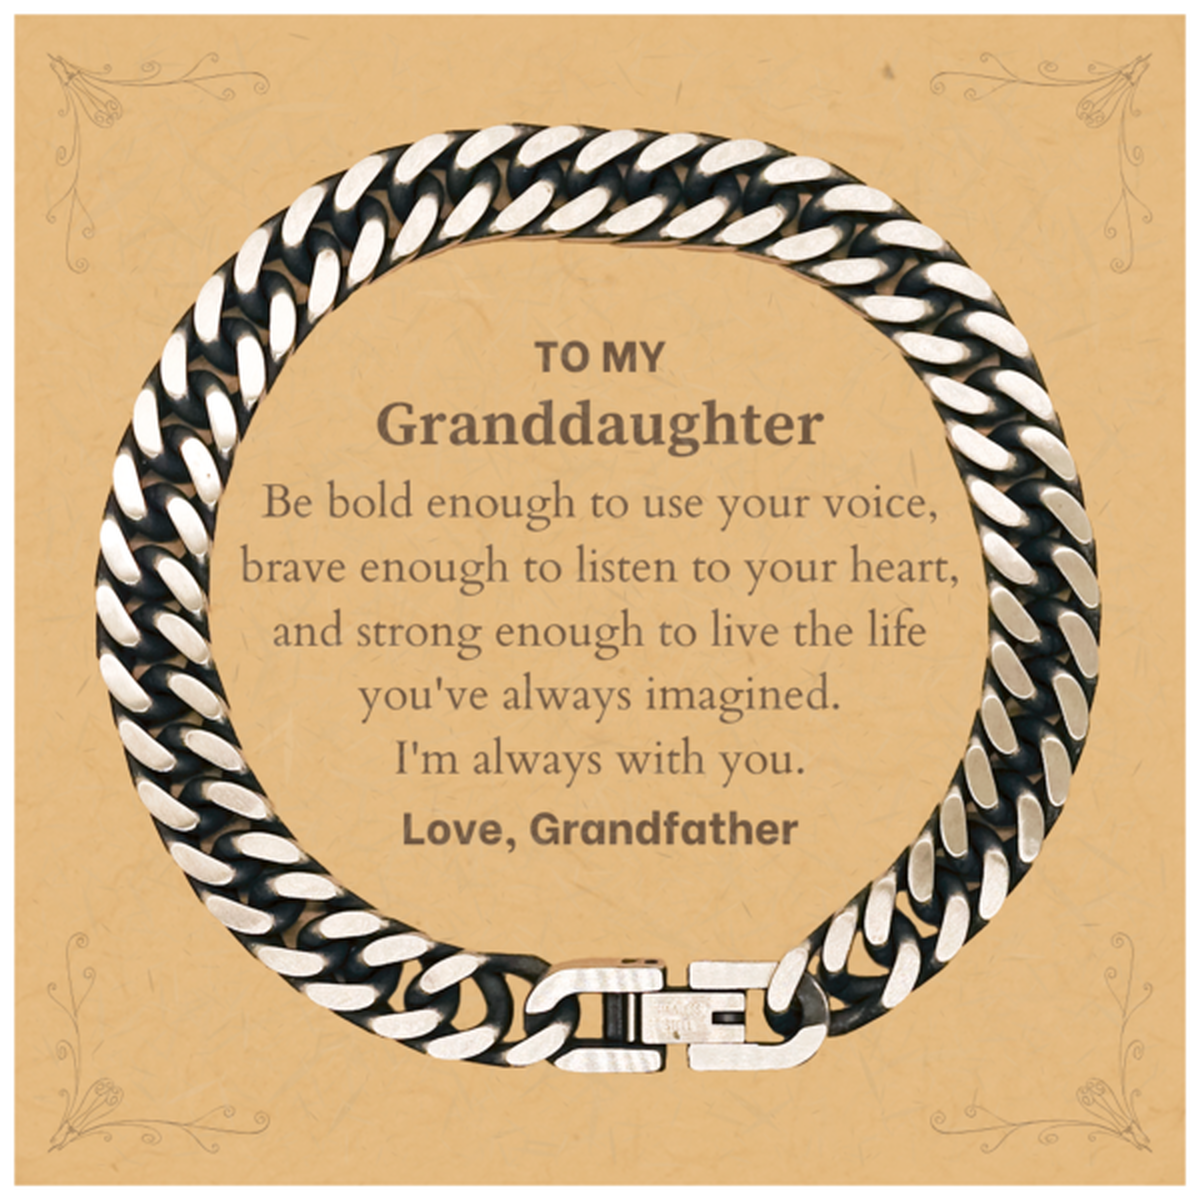 Keepsake Granddaughter Cuban Link Chain Bracelet Gift Idea Graduation Christmas Birthday Granddaughter from Grandfather, Granddaughter Be bold enough to use your voice, brave enough to listen to your heart. Love, Grandfather